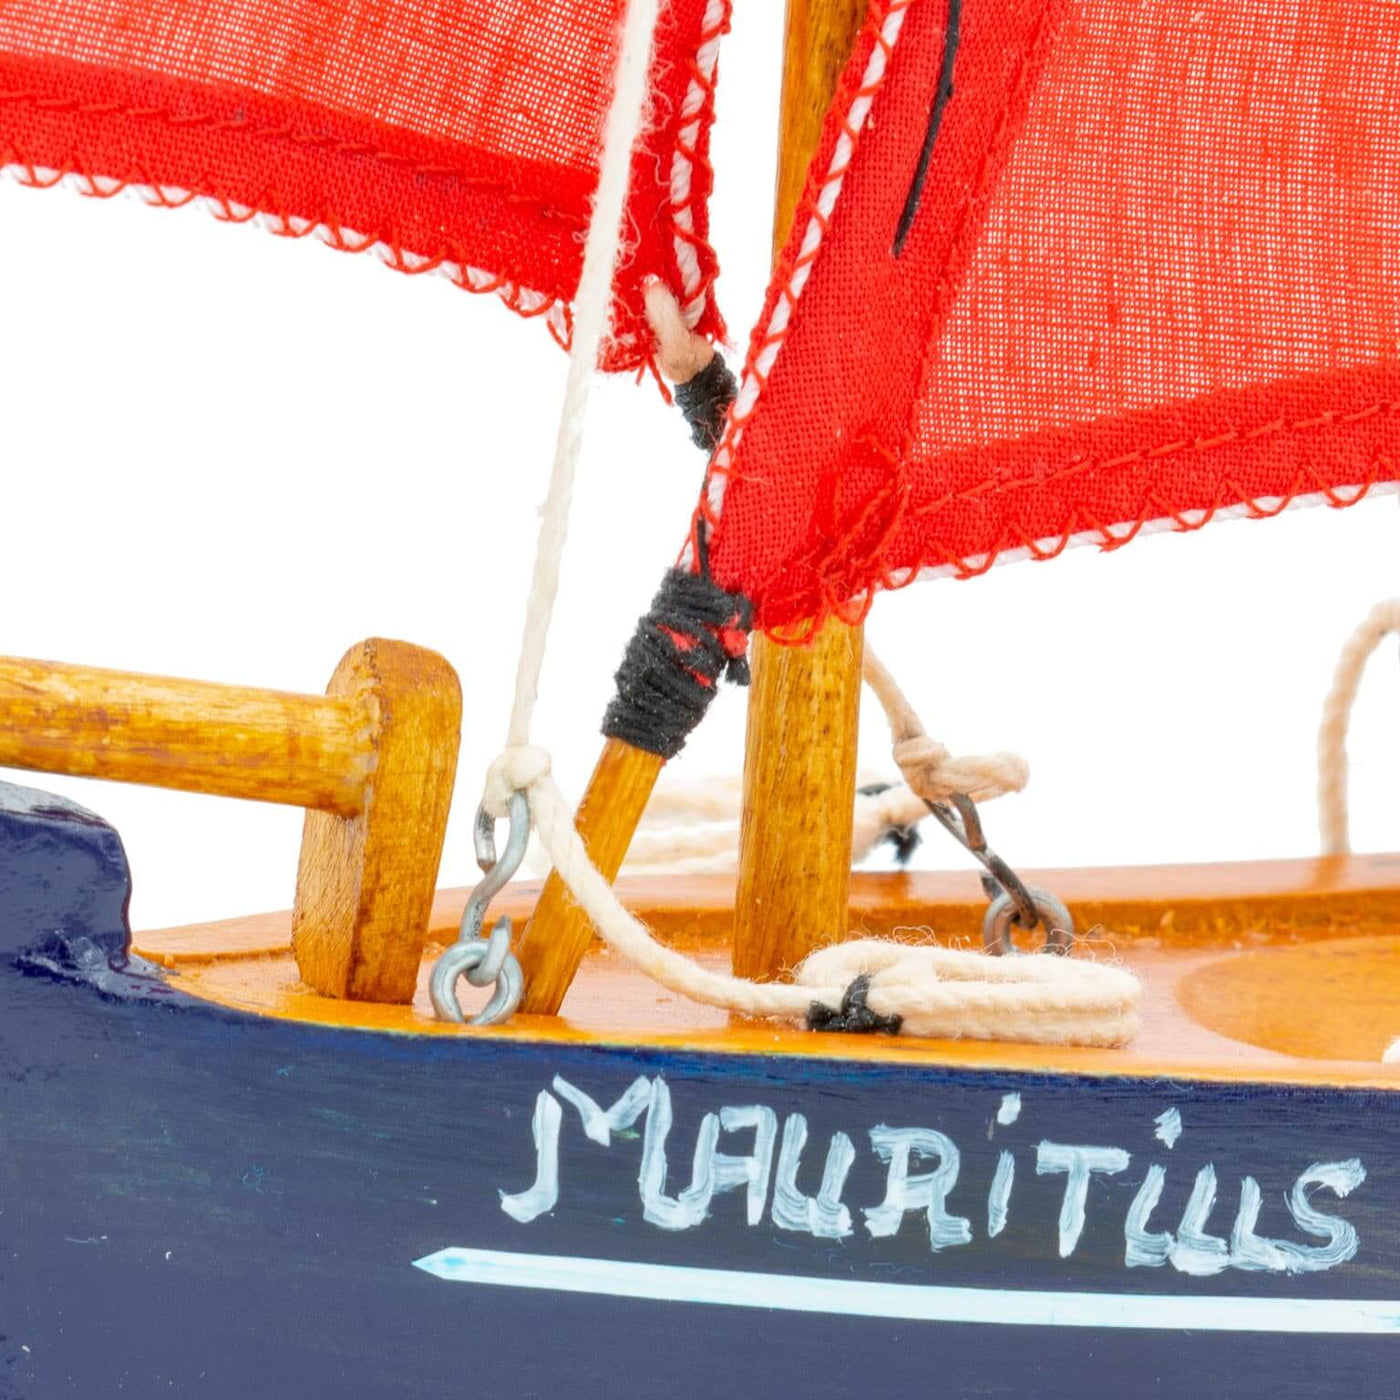 Mauritius-Handmade-Ship-Model-Small Traditional Pirogue - Dark-blue hull with red sail-DodoMarket-Souvenirs